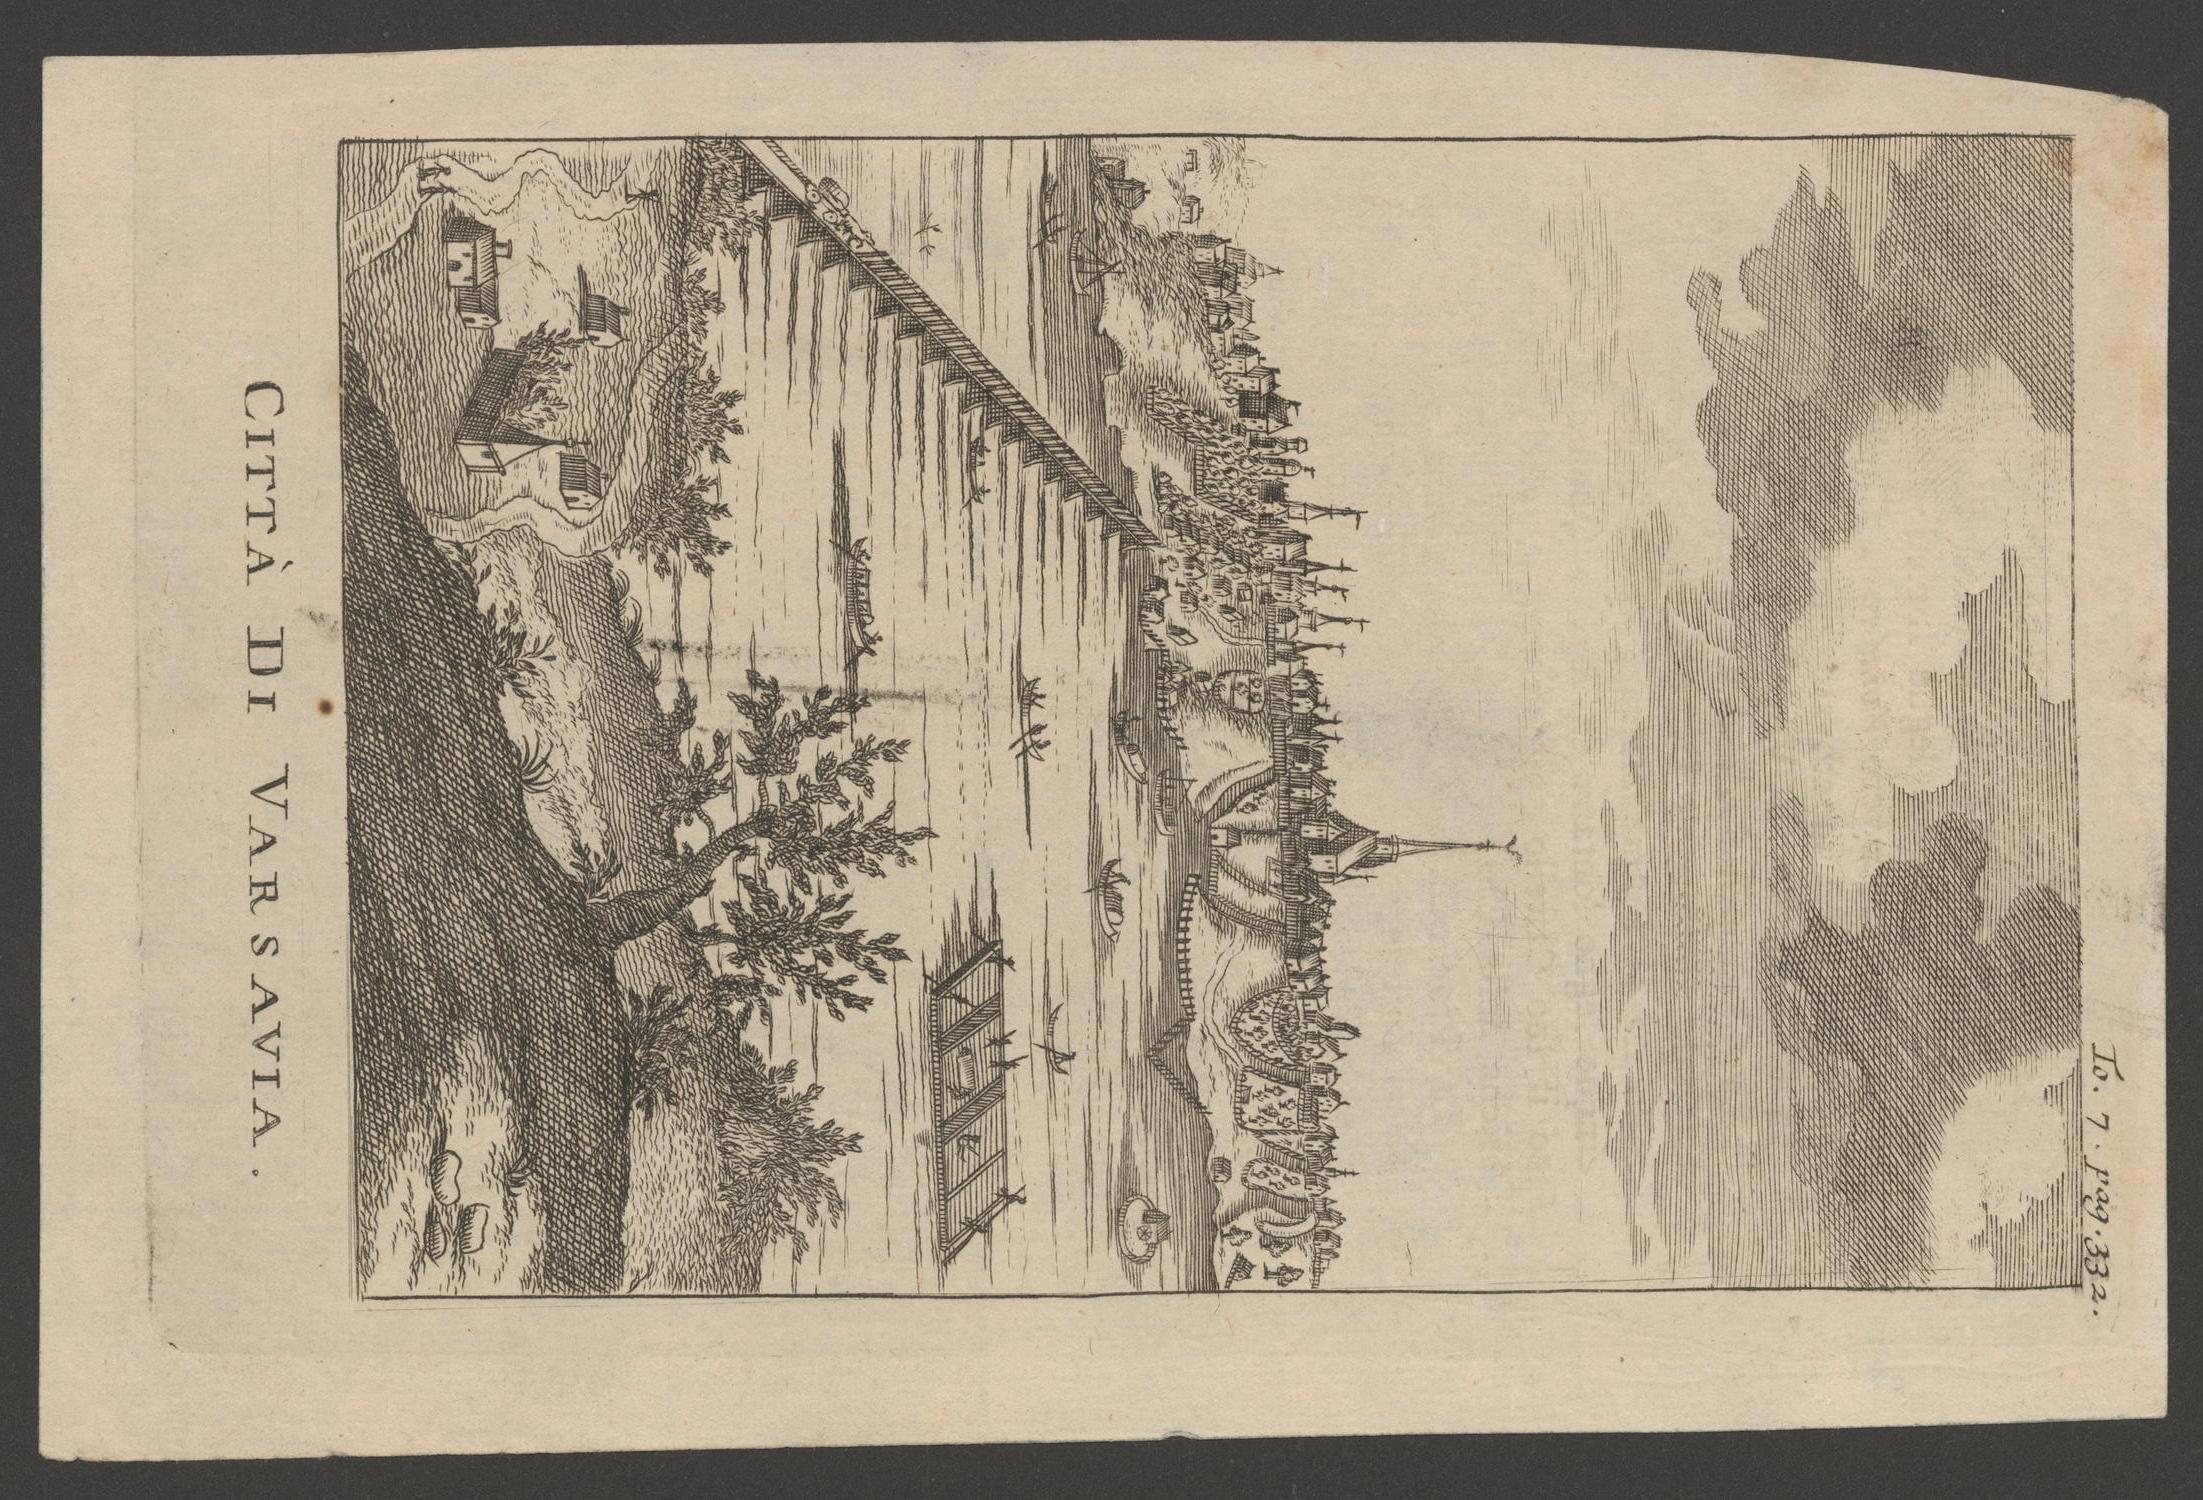 [Intaglio print from a type printed book of a city scape "Citta Di Varsavia"]
                                                
                                                    [Sequence #]: 1 of 2
                                                